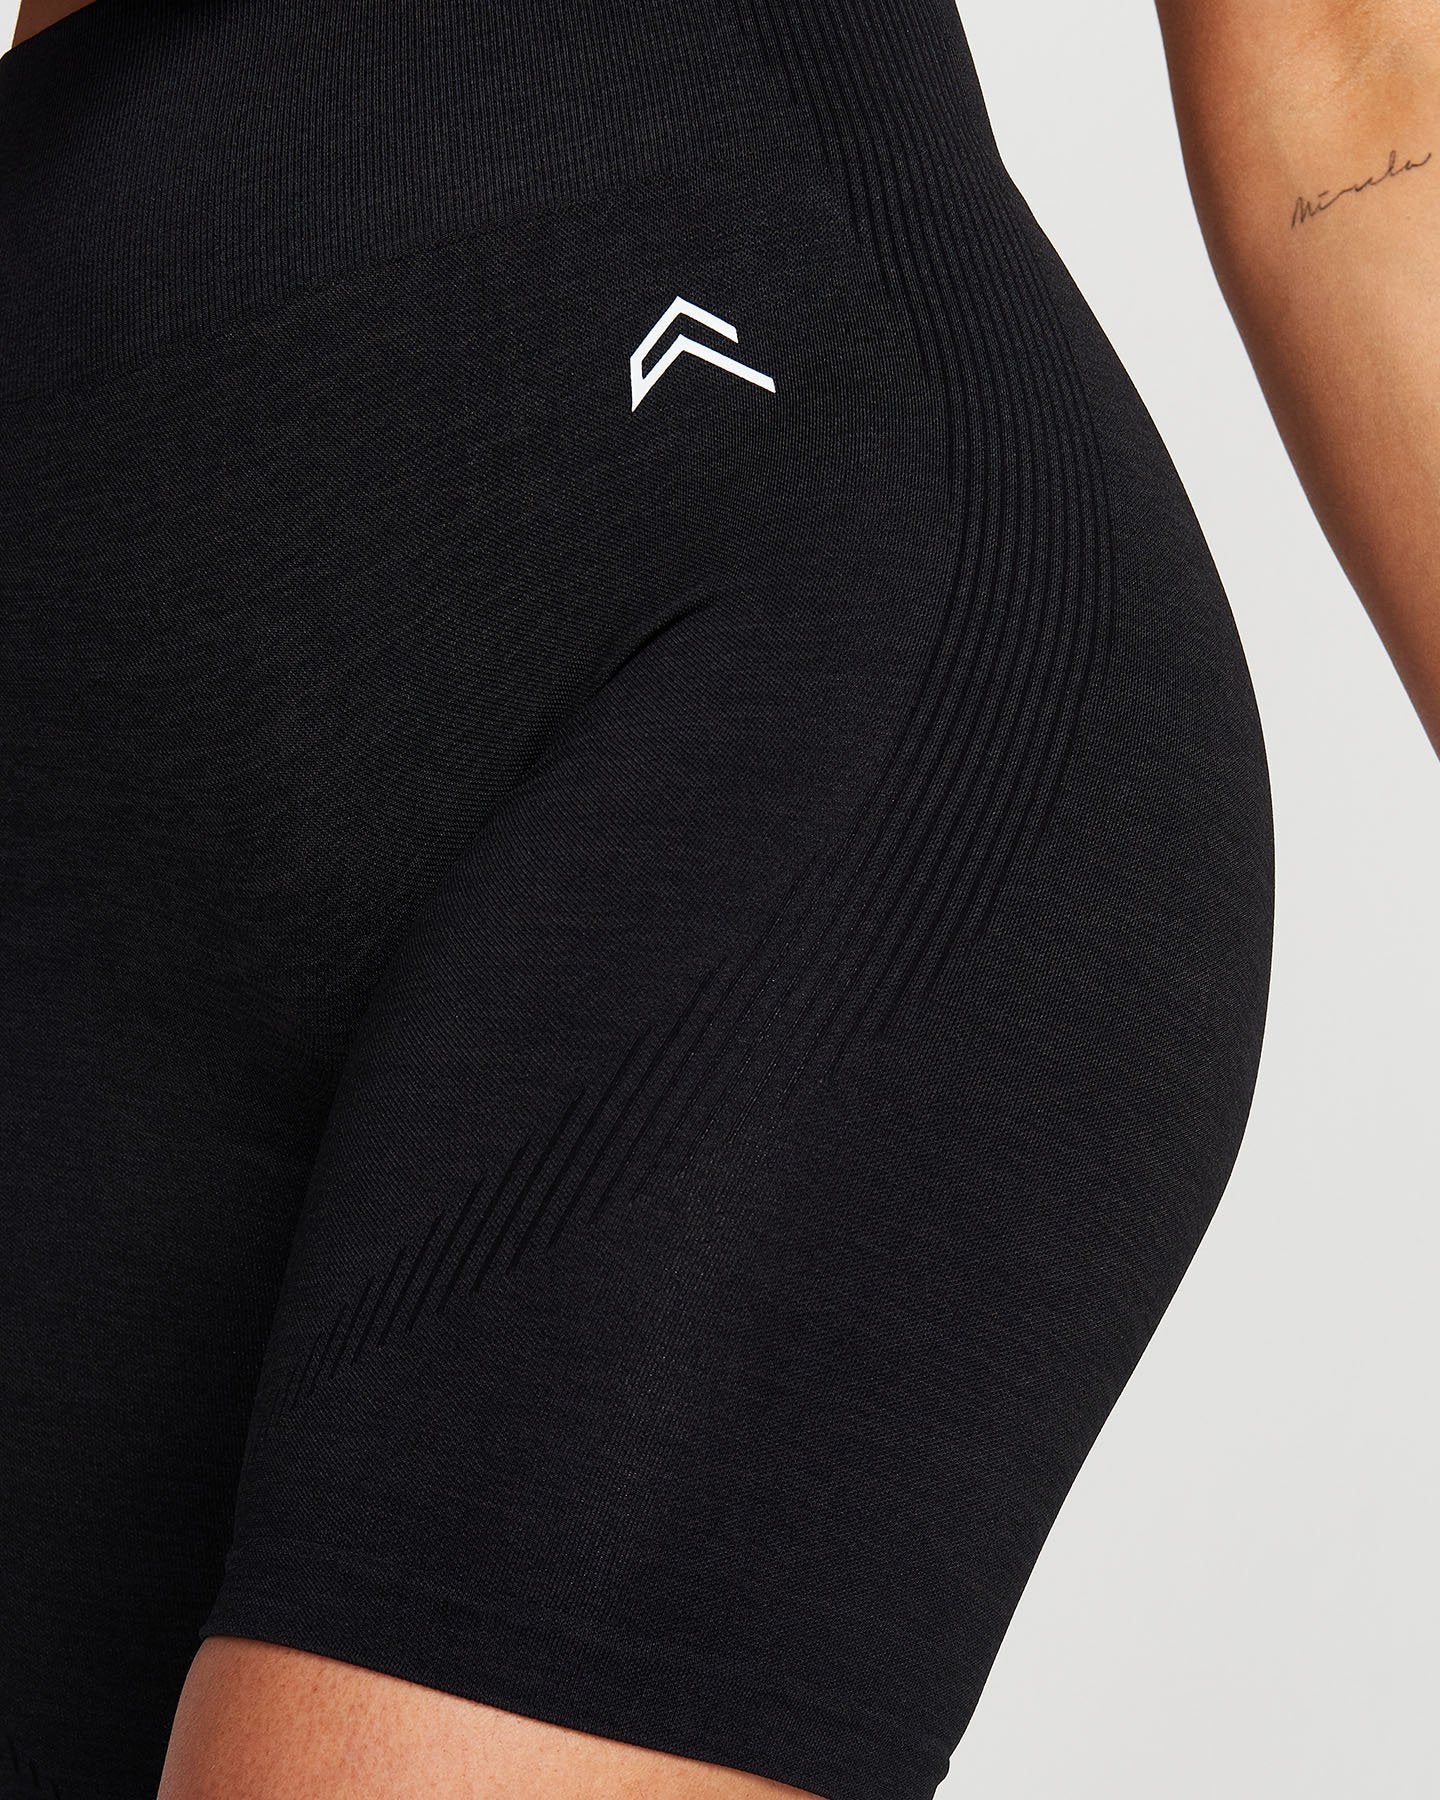 ONER ACTIVE Classic seamless cycling shorts, Women's Fashion